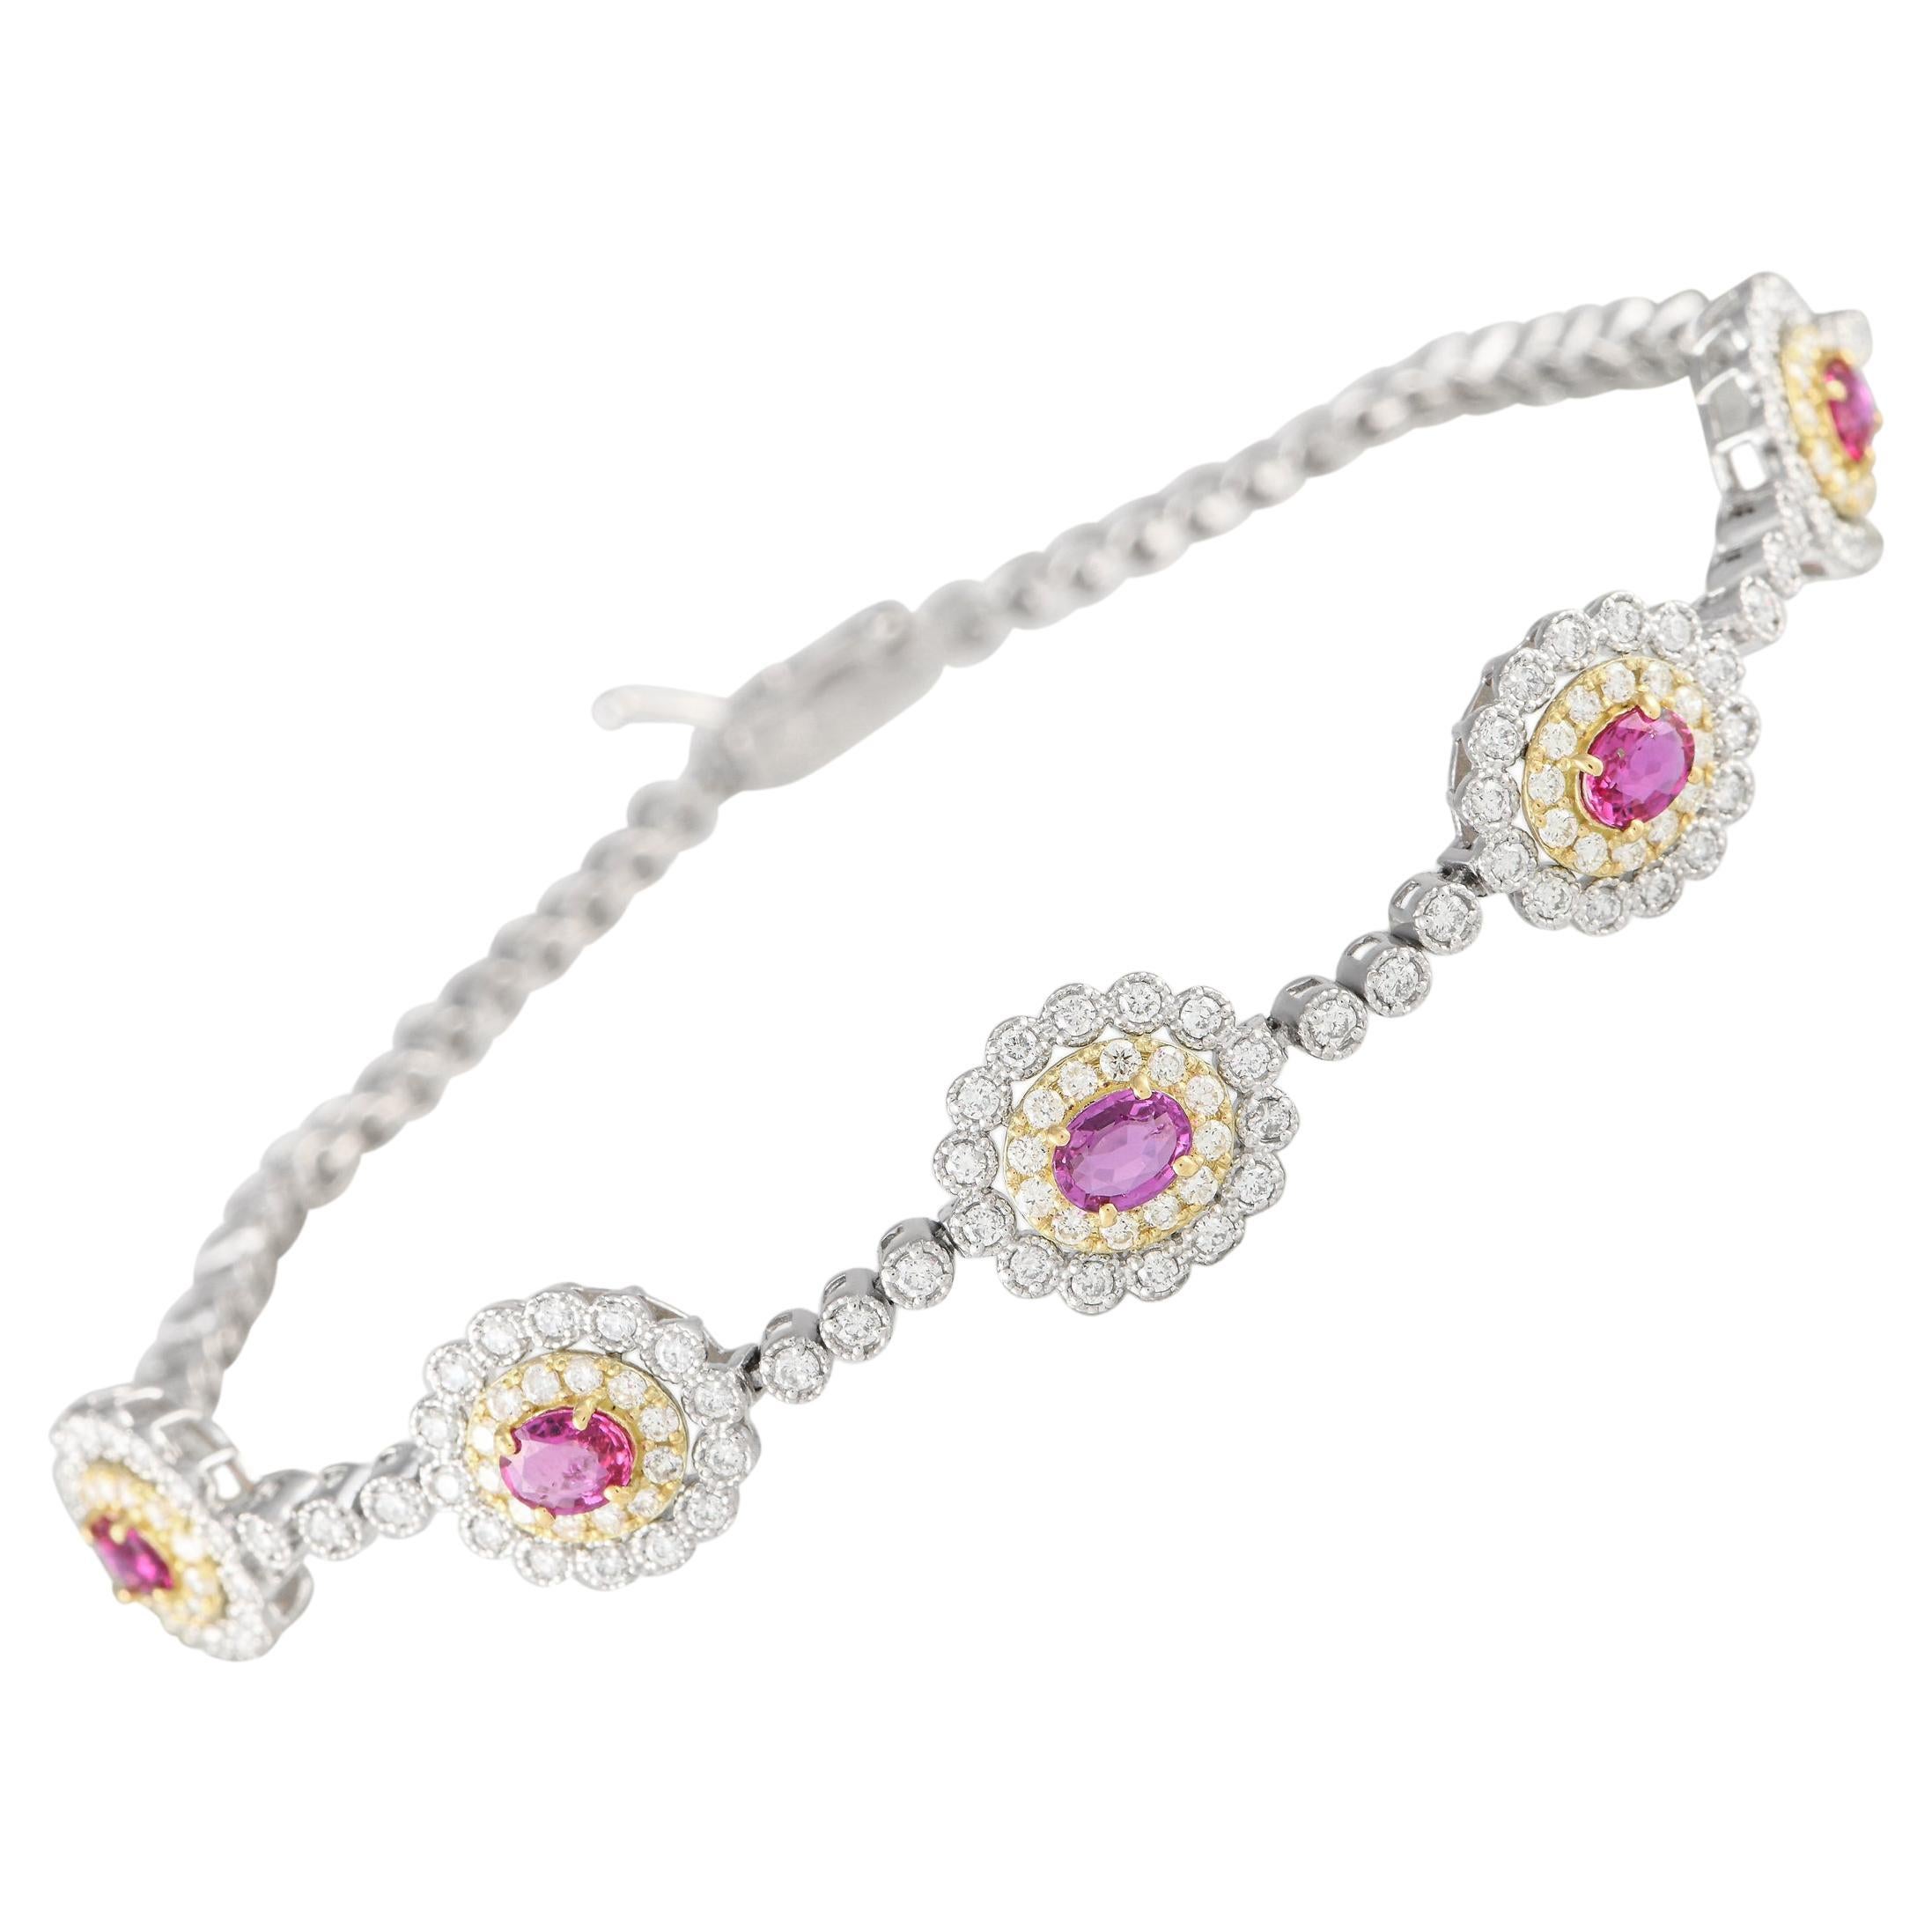 LB Exclusive 18K White Gold 1.40ct Diamond and Ruby Bracelet